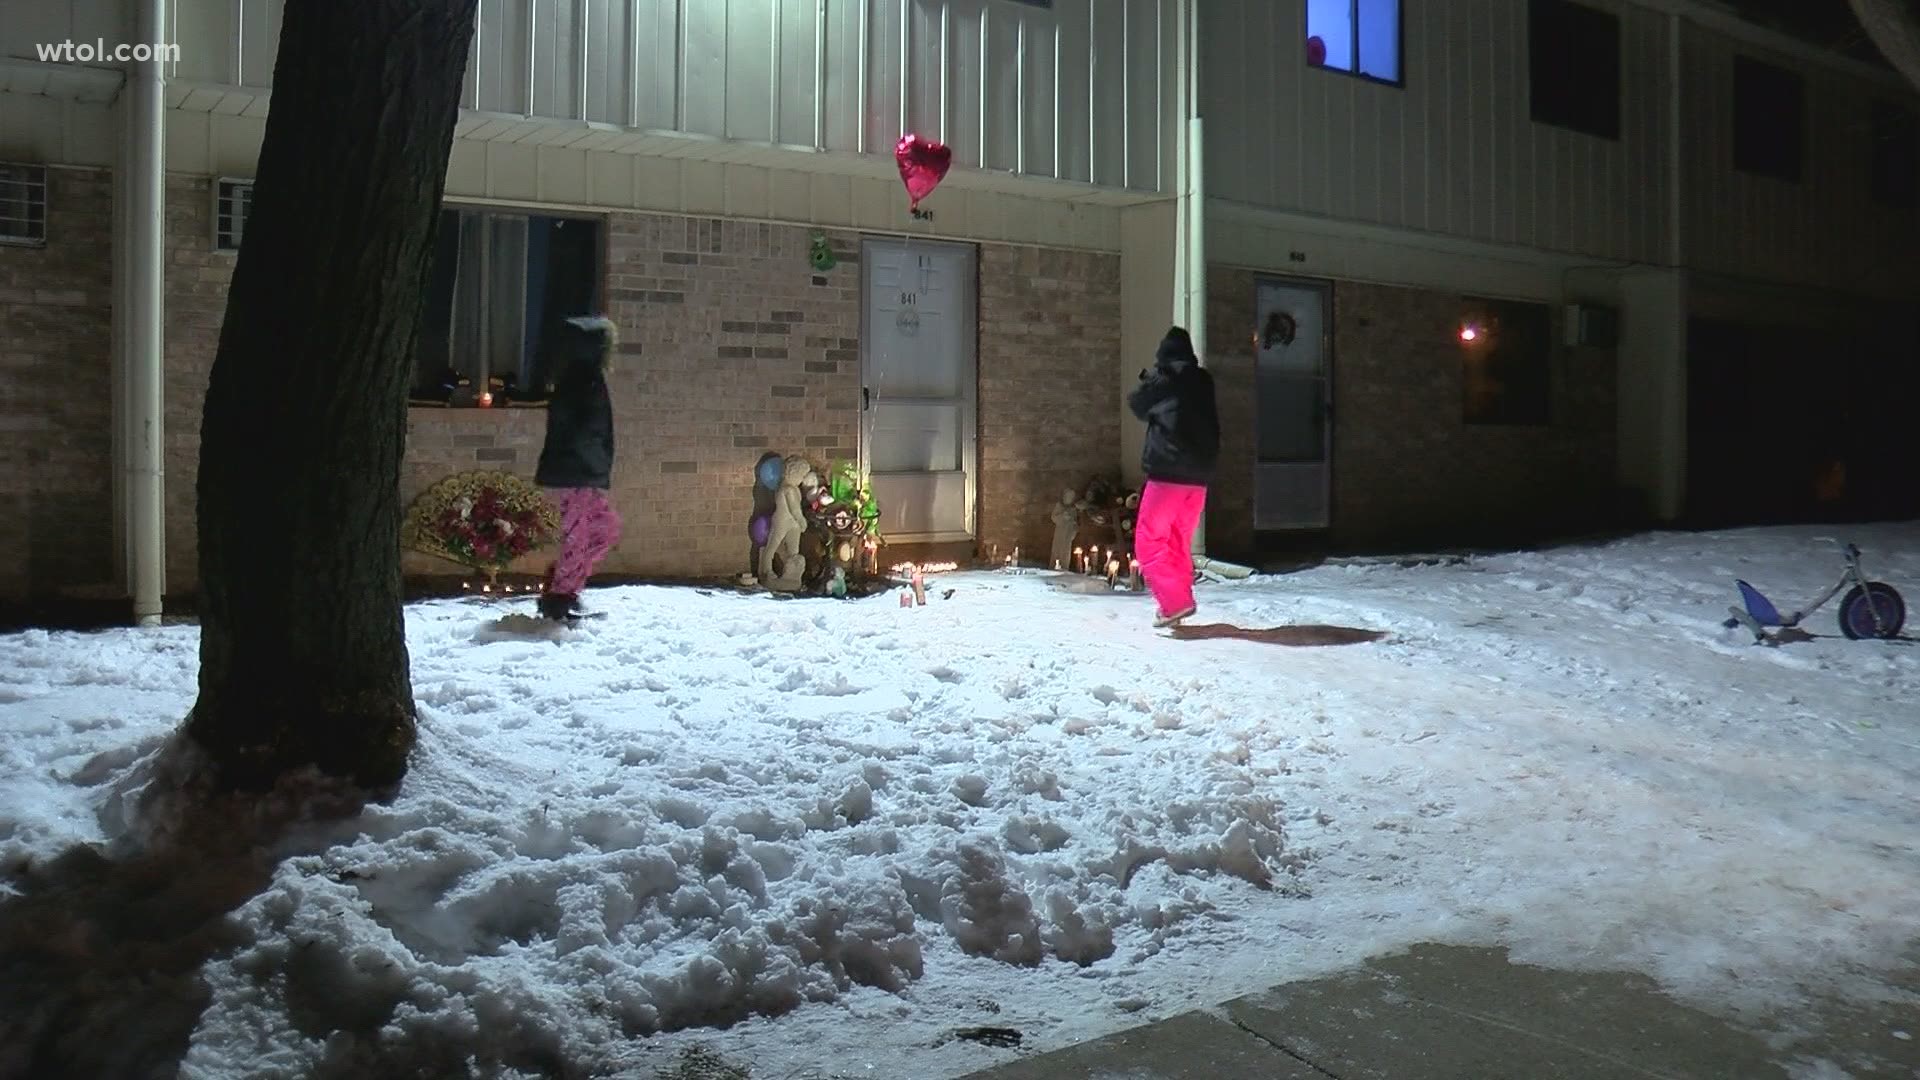 A 5-year-old, 4-year-old, and 1-year-old were shot at the Byrneport Apartments on Friday. Two of the boys were killed. The third is fighting for his life.